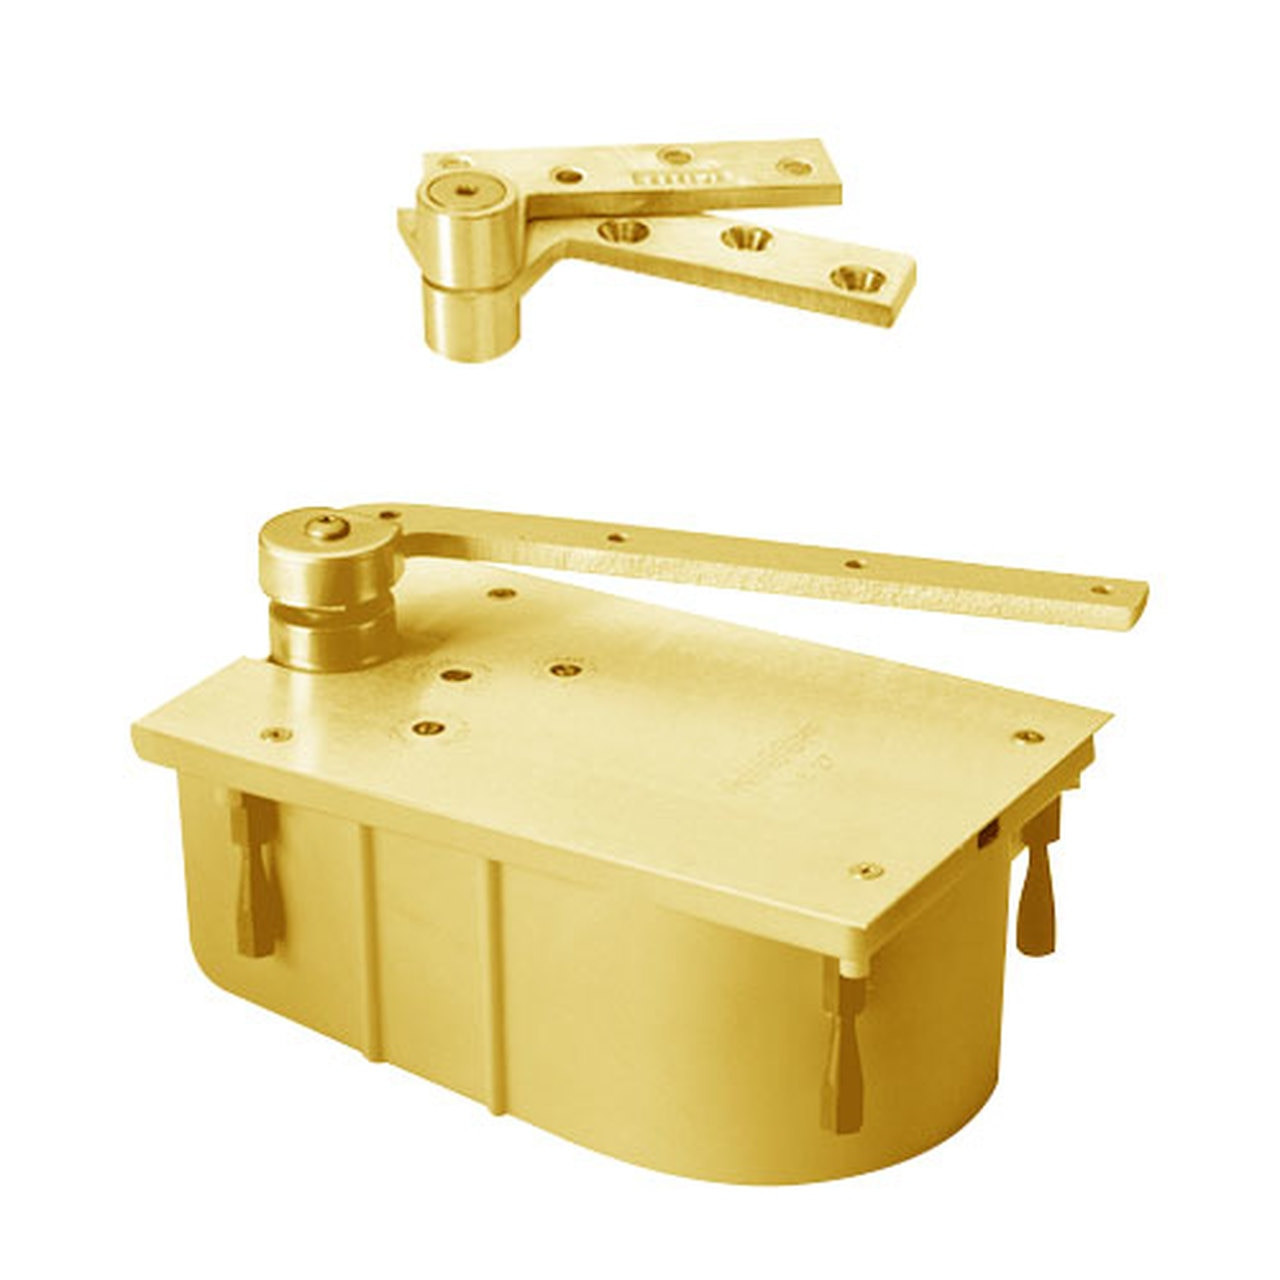 127-85S-LCC-LH-605 Rixson 27 Series Heavy Duty 3/4" Offset Hung Floor Closer in Bright Brass Finish